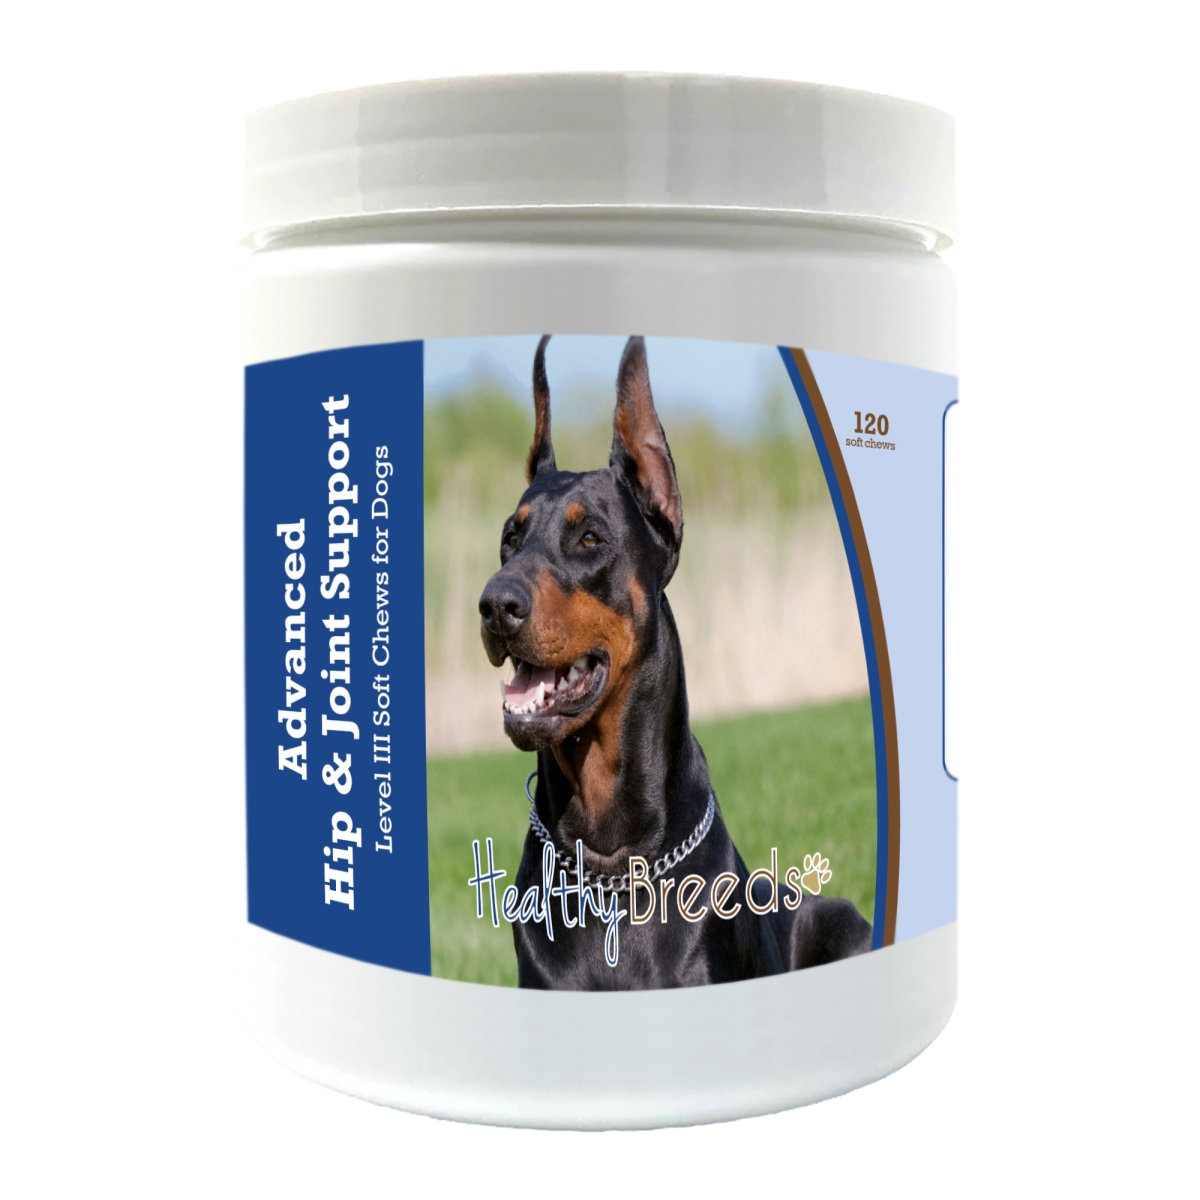 Picture of Healthy Breeds 192959898132 Doberman Pinscher Advanced Hip & Joint Support Level III Soft Chews for Dogs